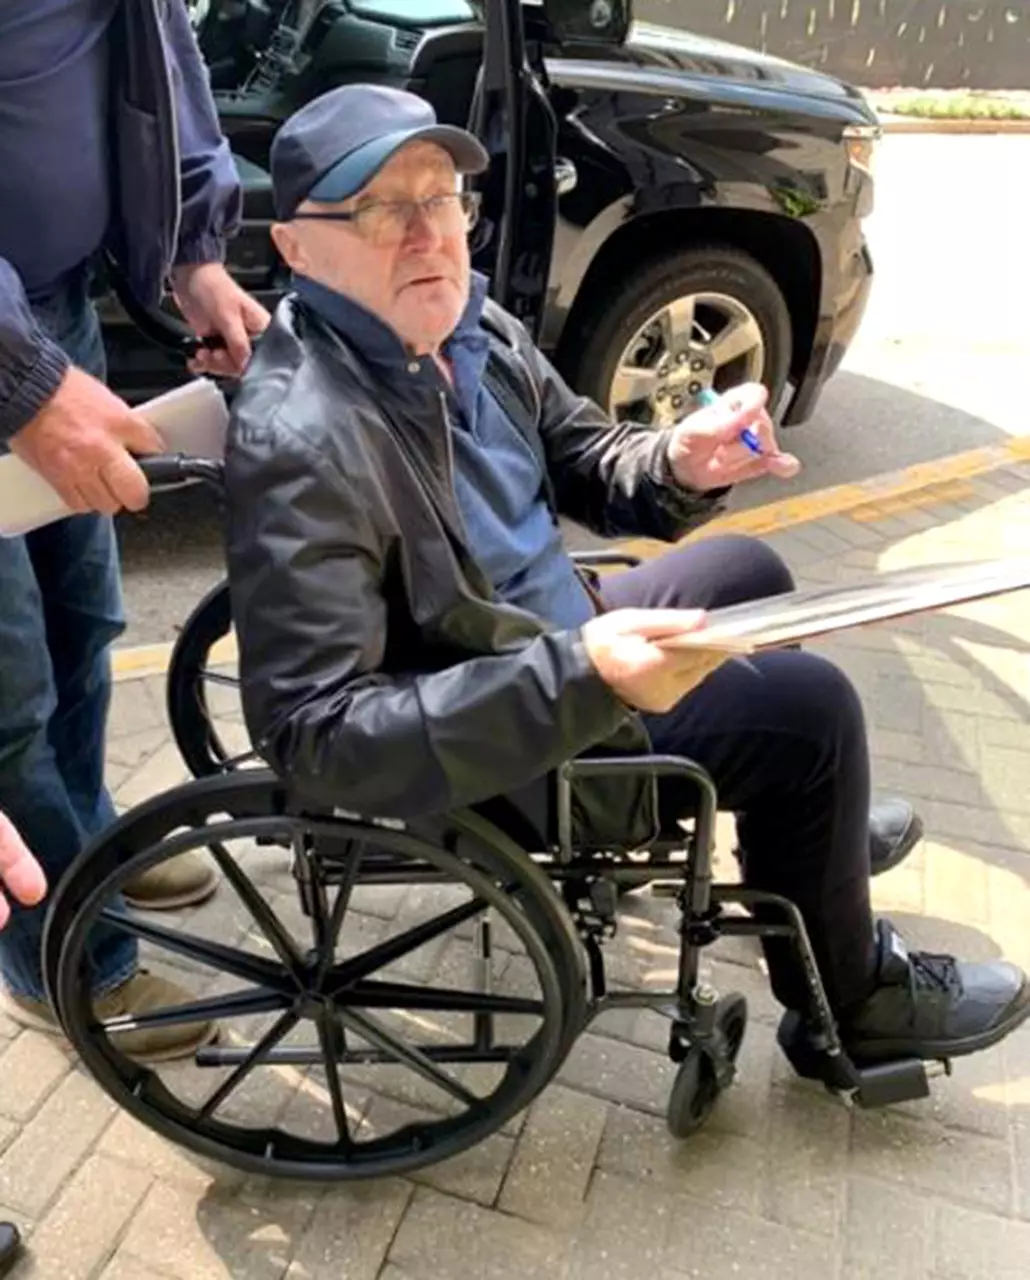 Phil Collins looks frail in a wheelchair following a fall on-stage.